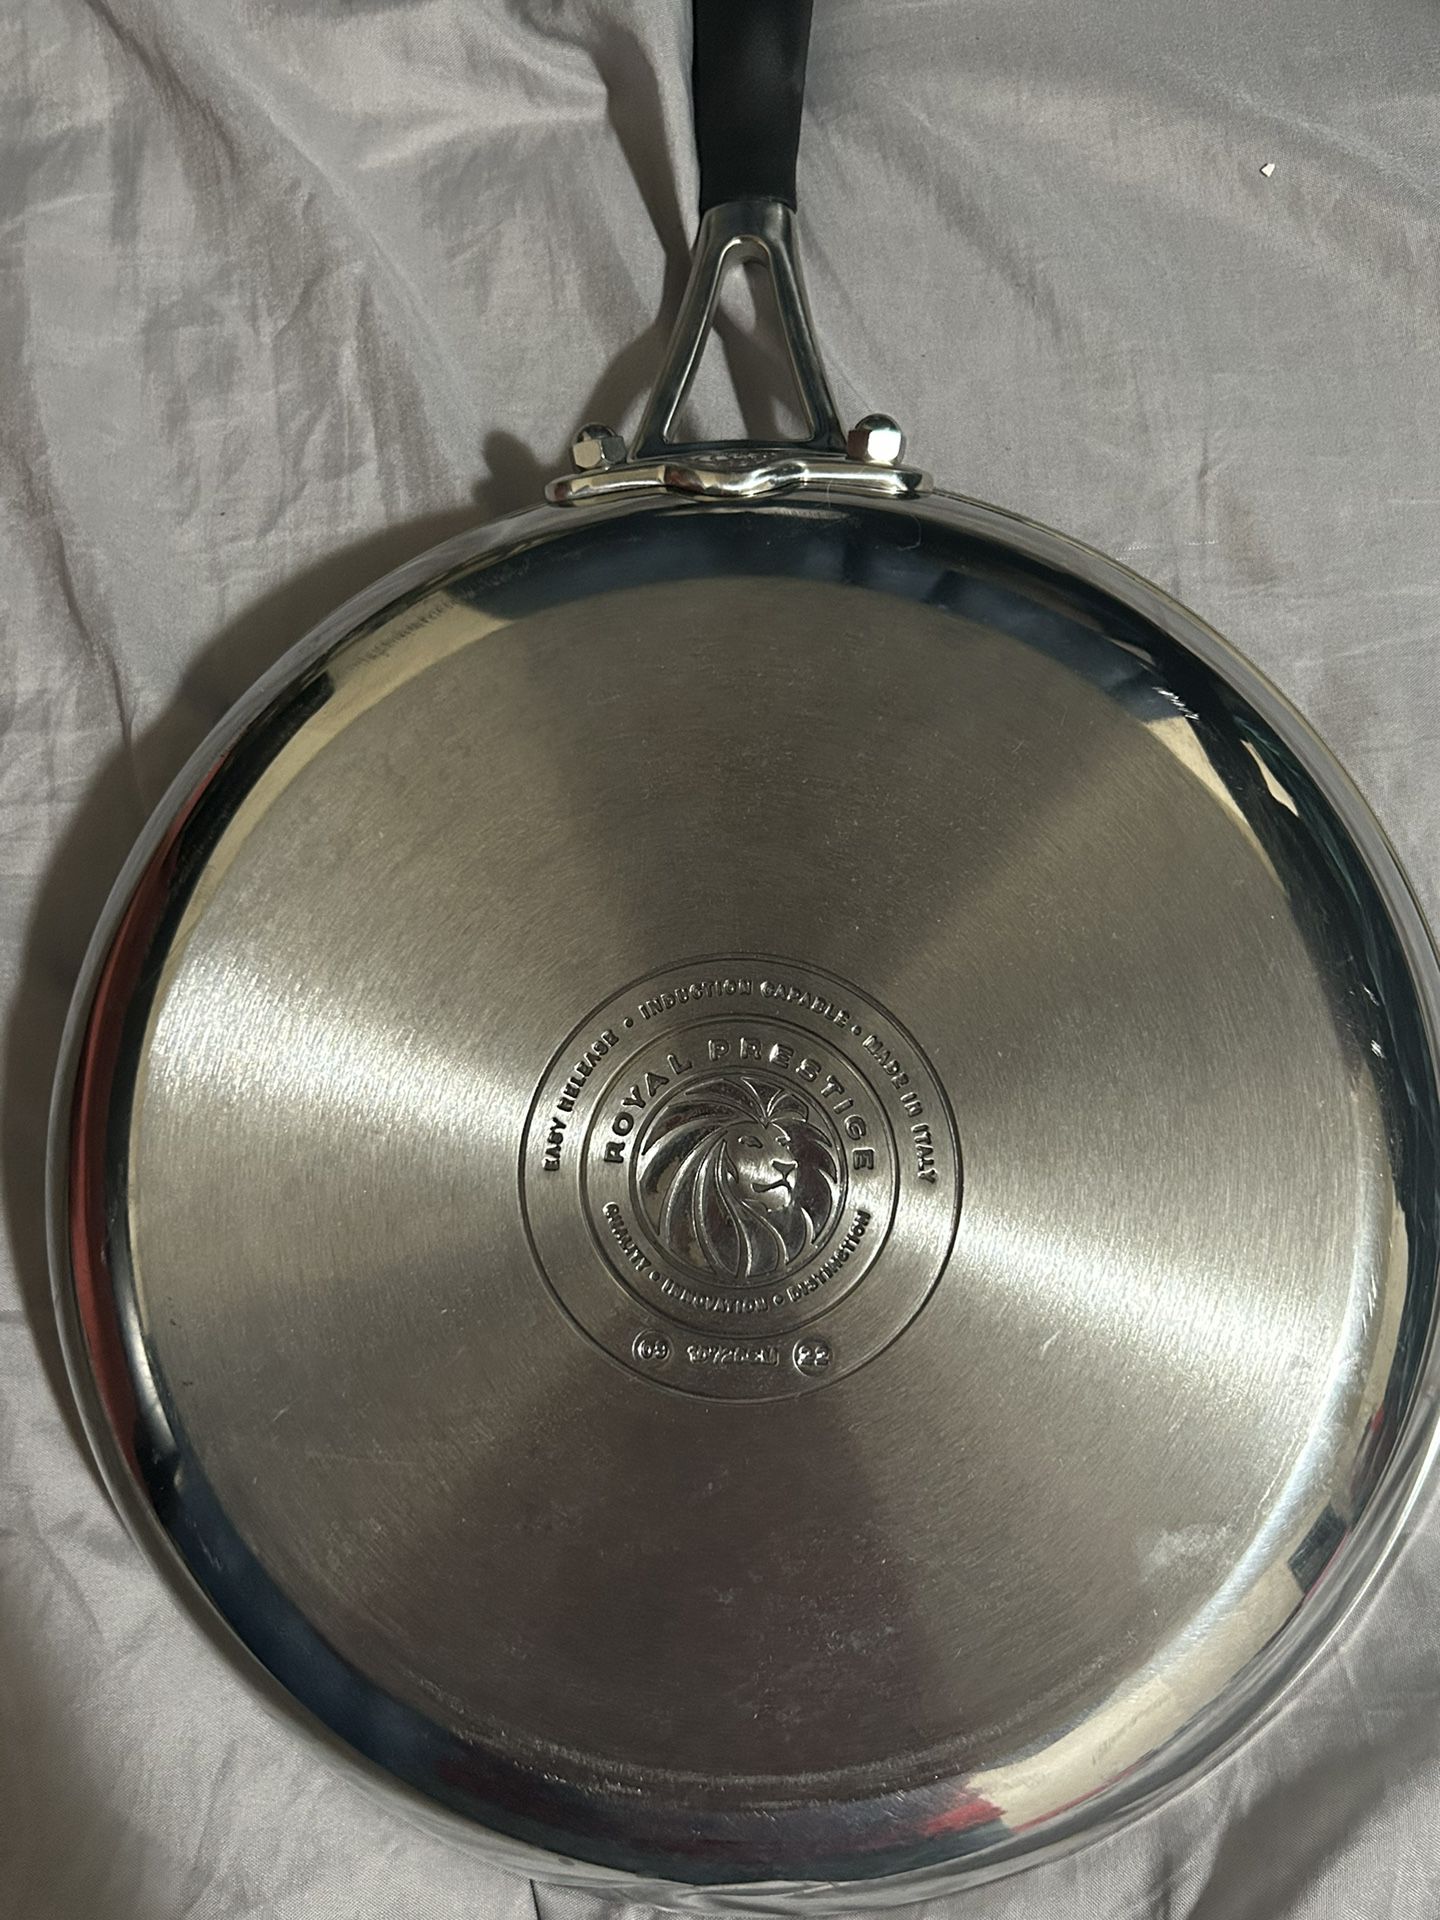 New Royal prestige Deluxe easy release cookware